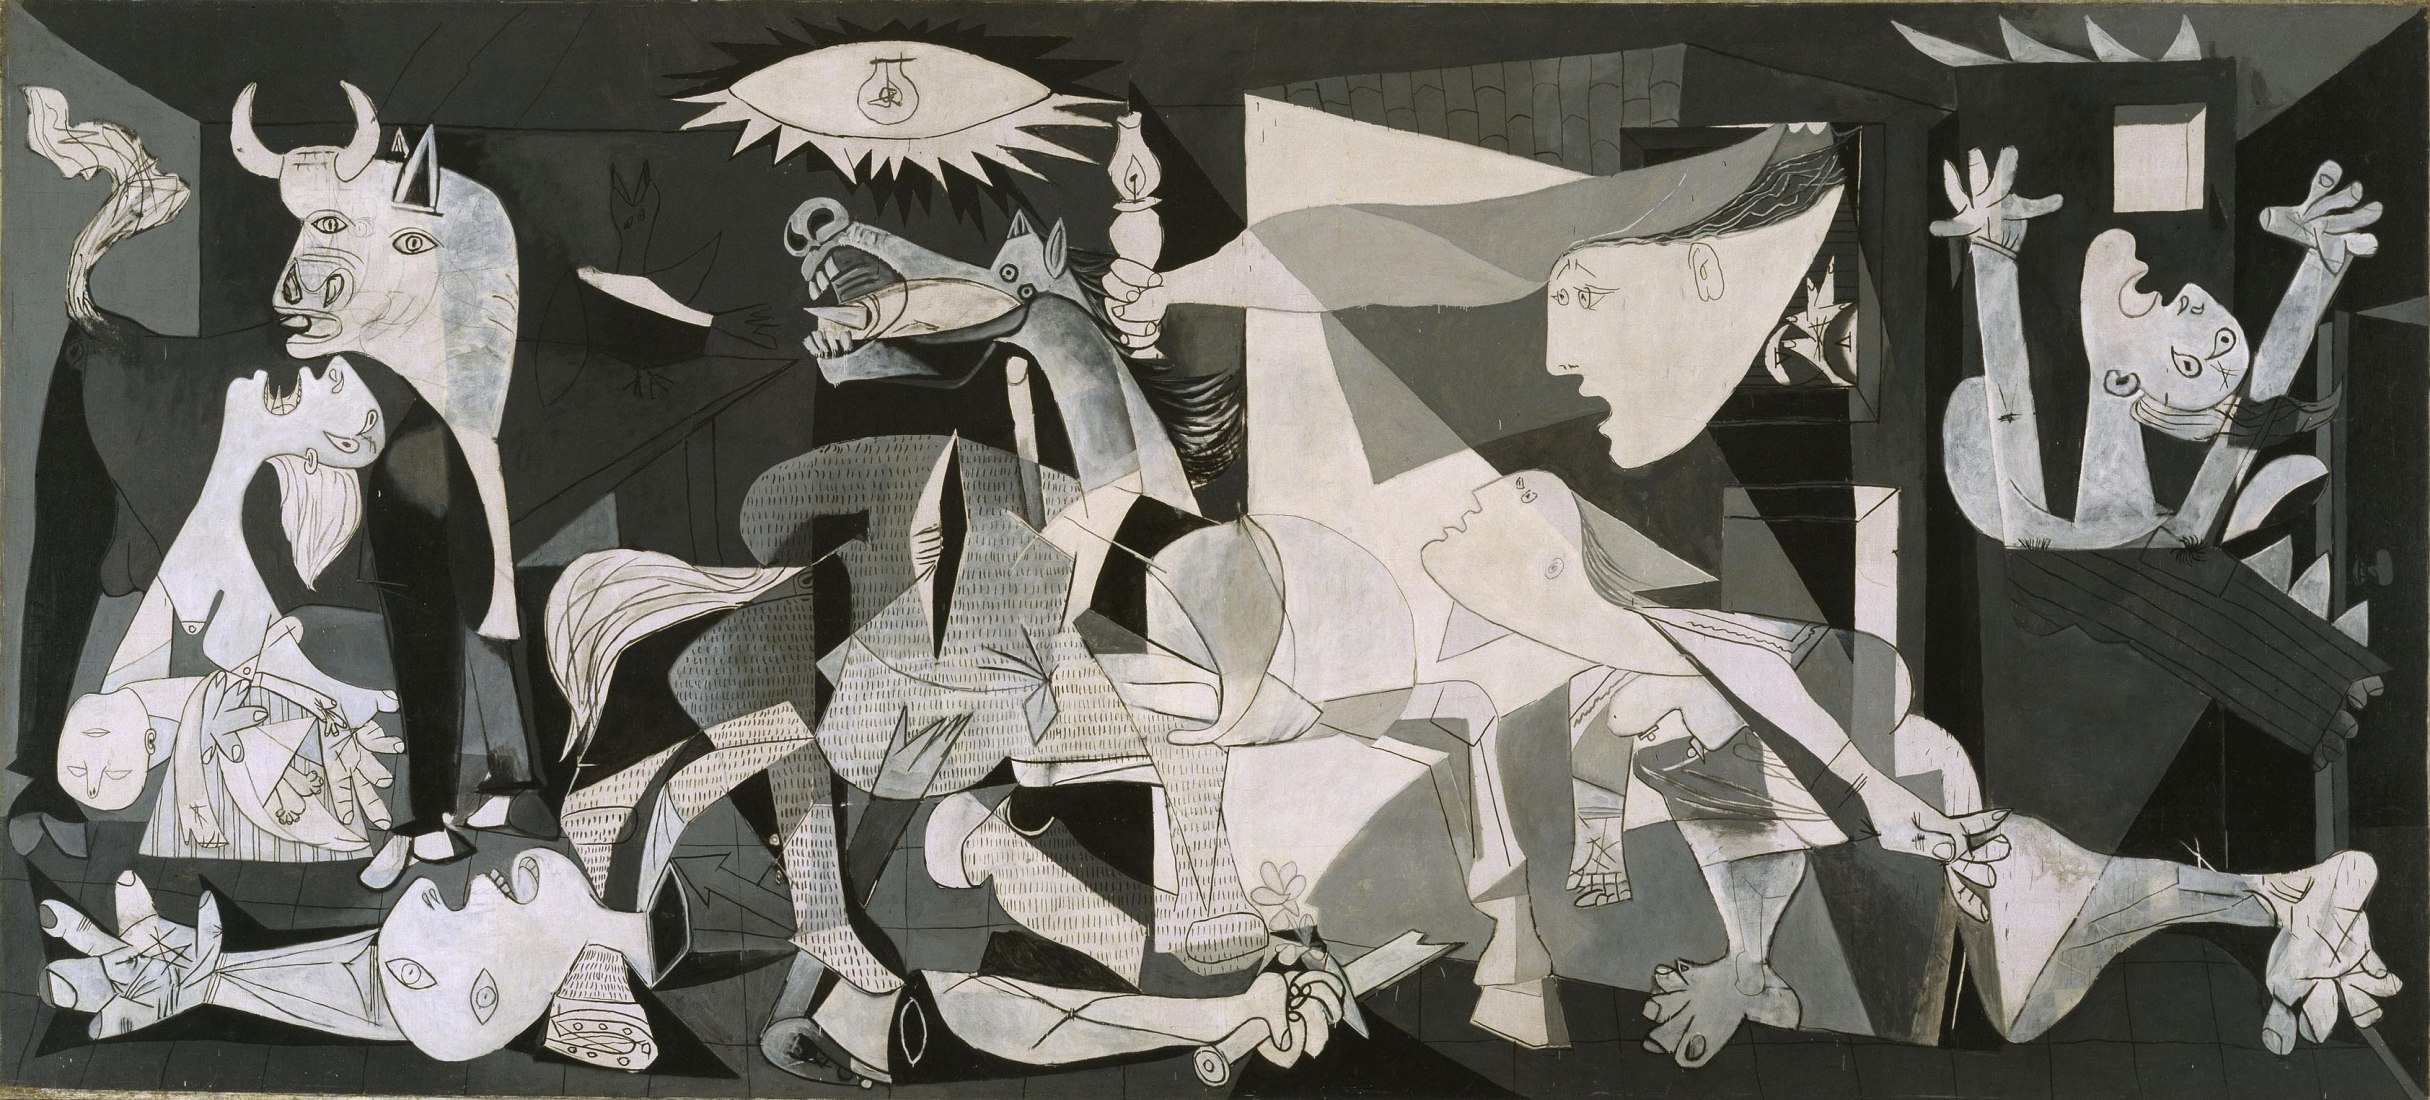 Timothy J. Clark. Another look at Guernica